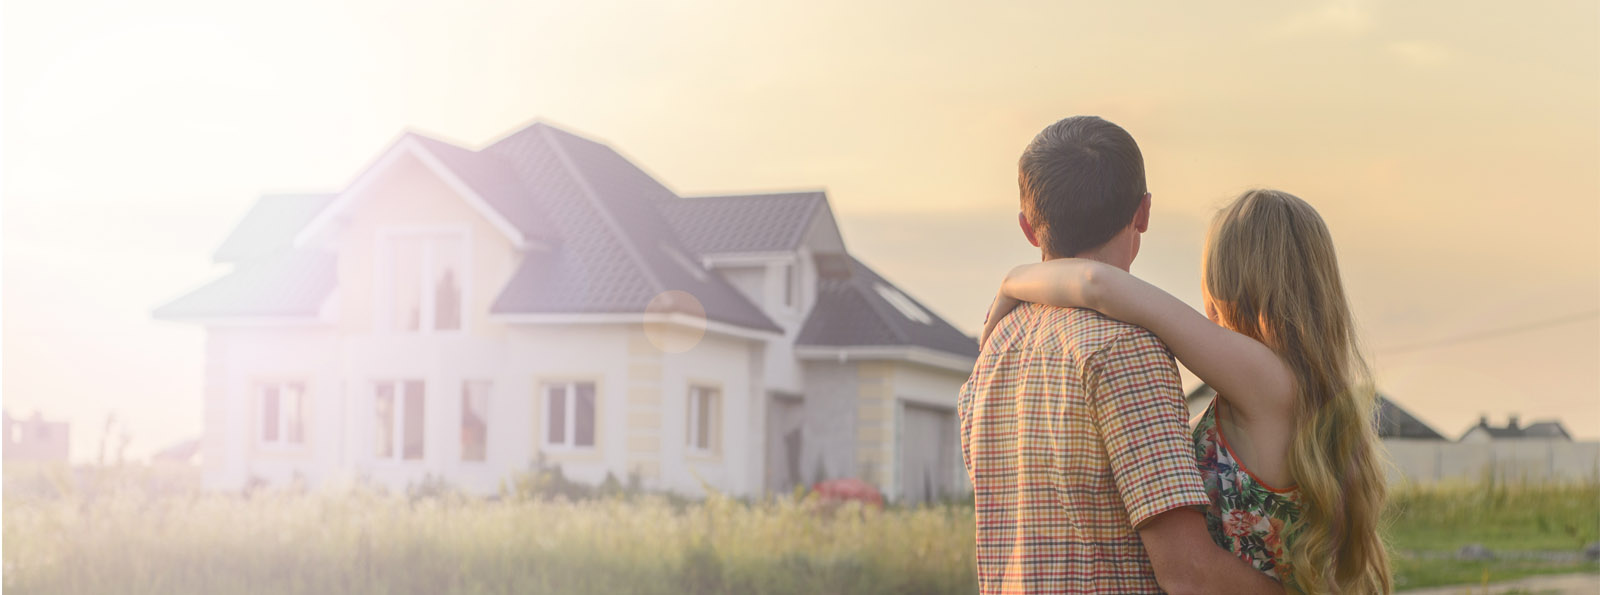 young couple hugging while admiring their new home in the background